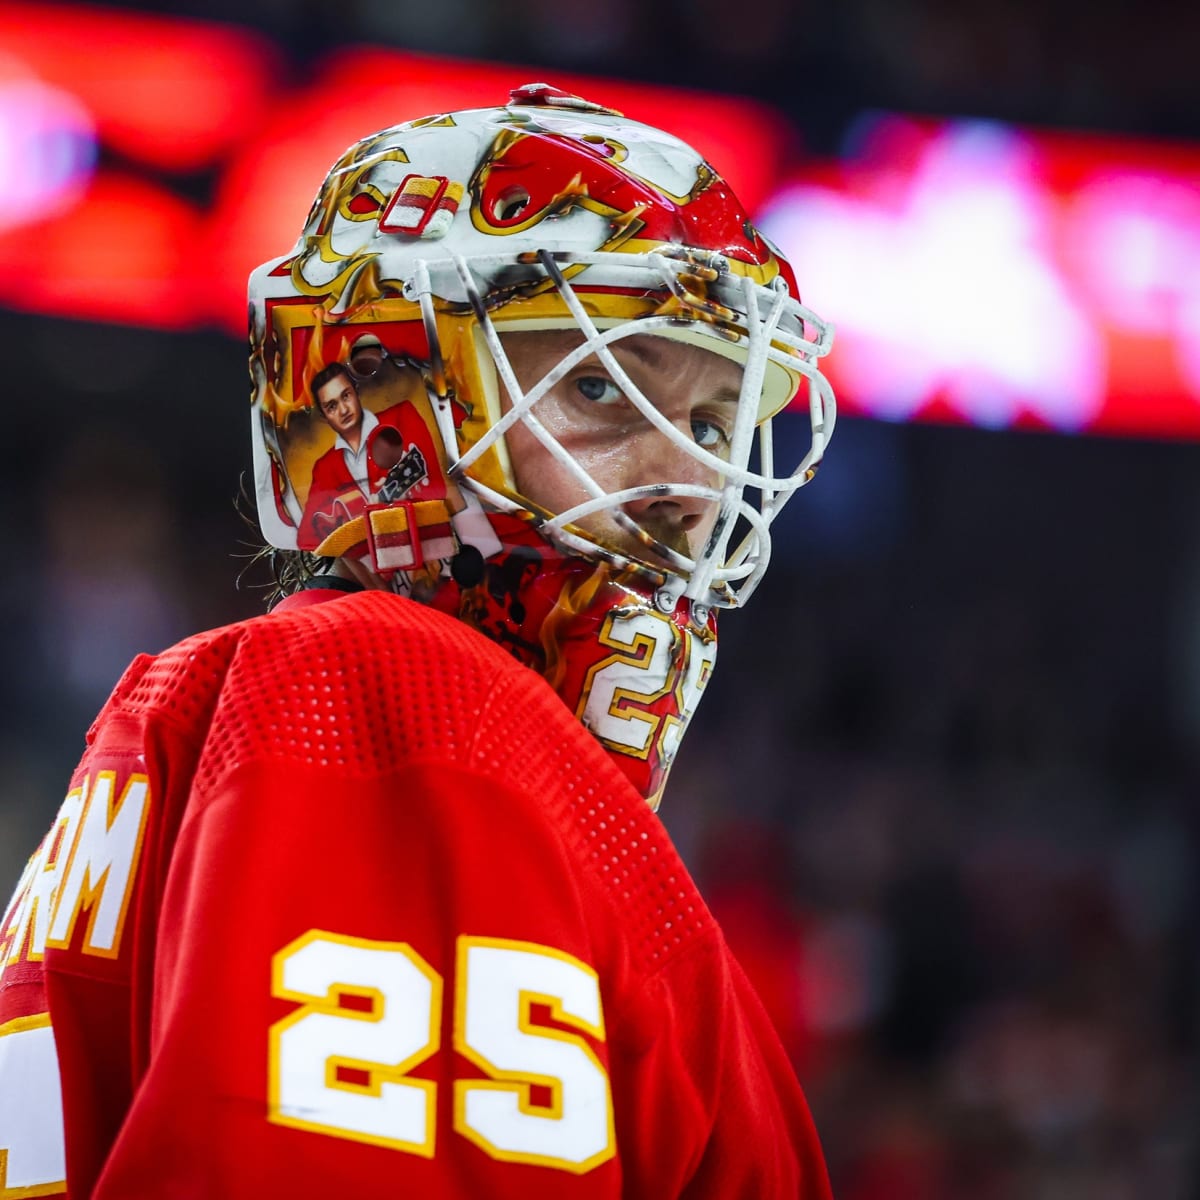 Markstrom believes Flames will be better in 2022-23